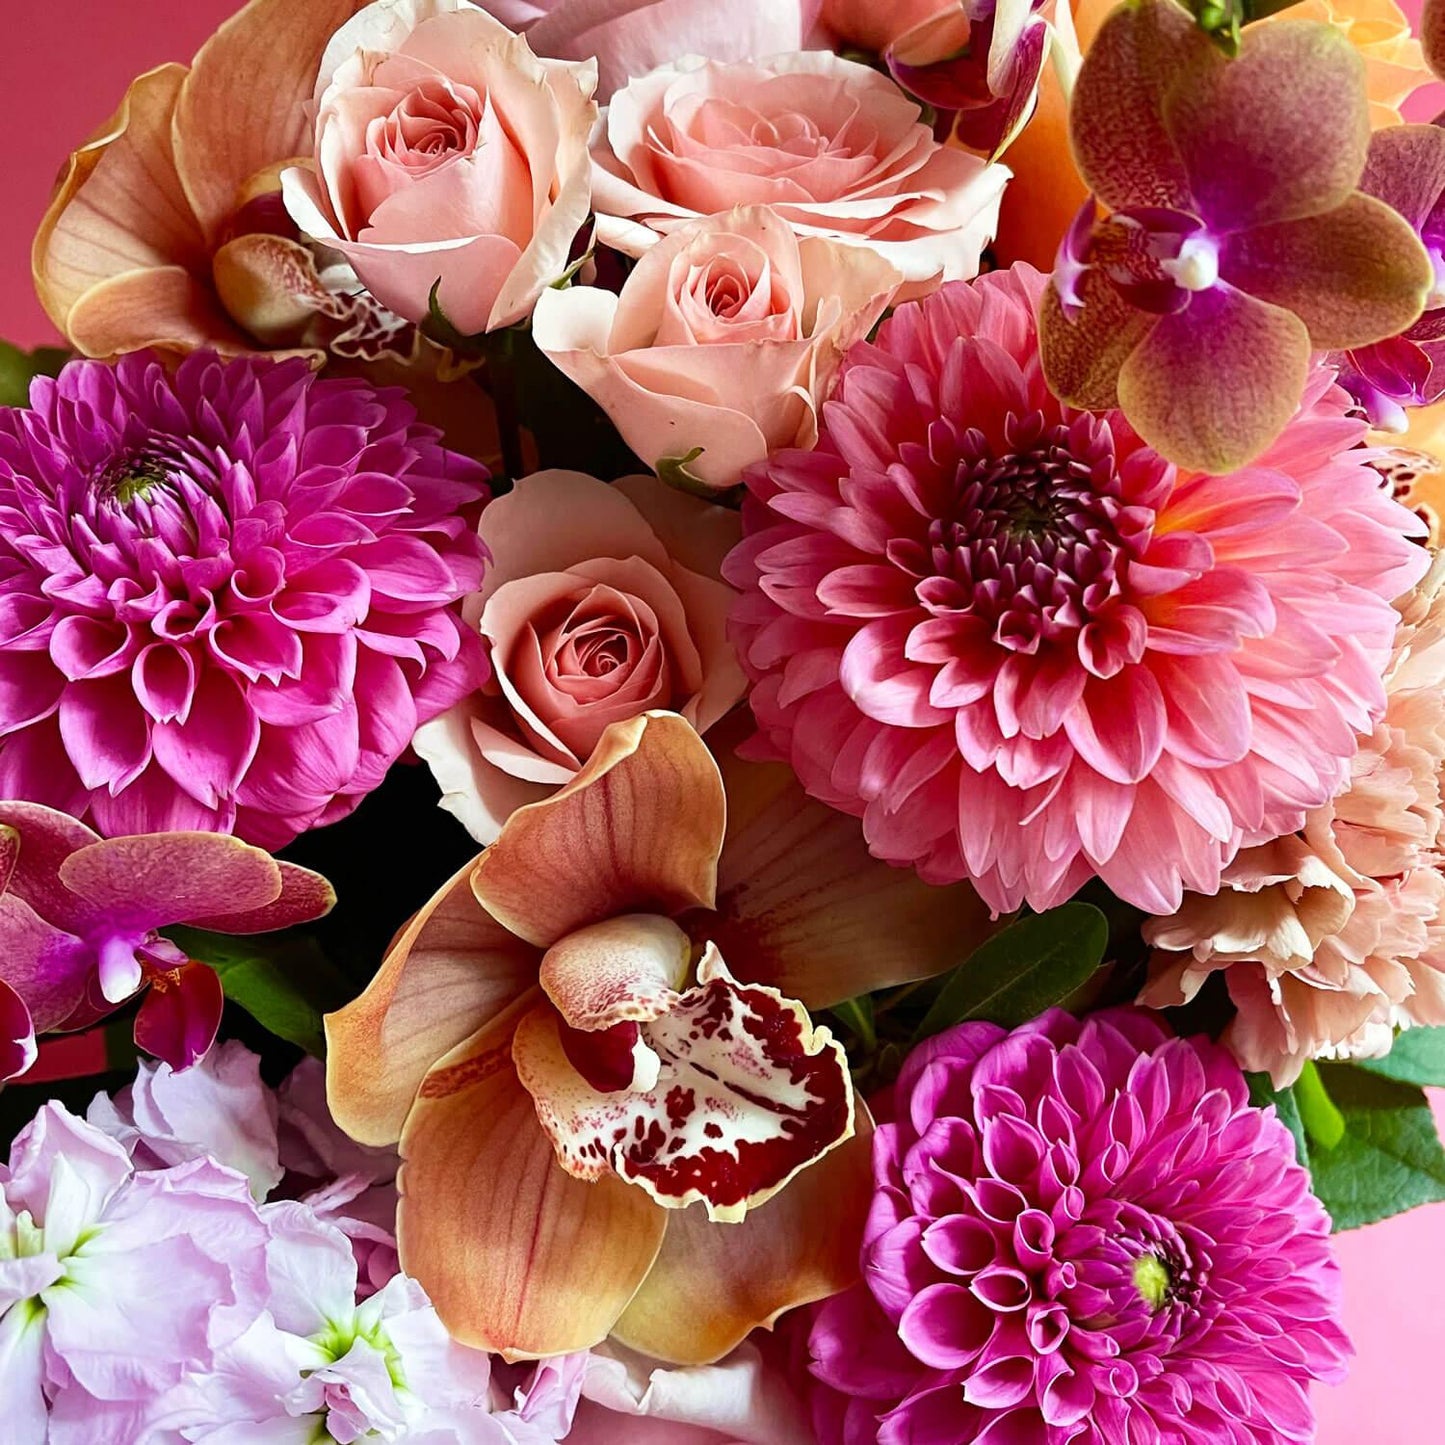 Close-up image of a bouquet featuring radiant colors including pink, orange, and pongee flowers, creating a daring and inspired palette.  Order online for same-day flower delivery from Toronto's best florist, available near you.